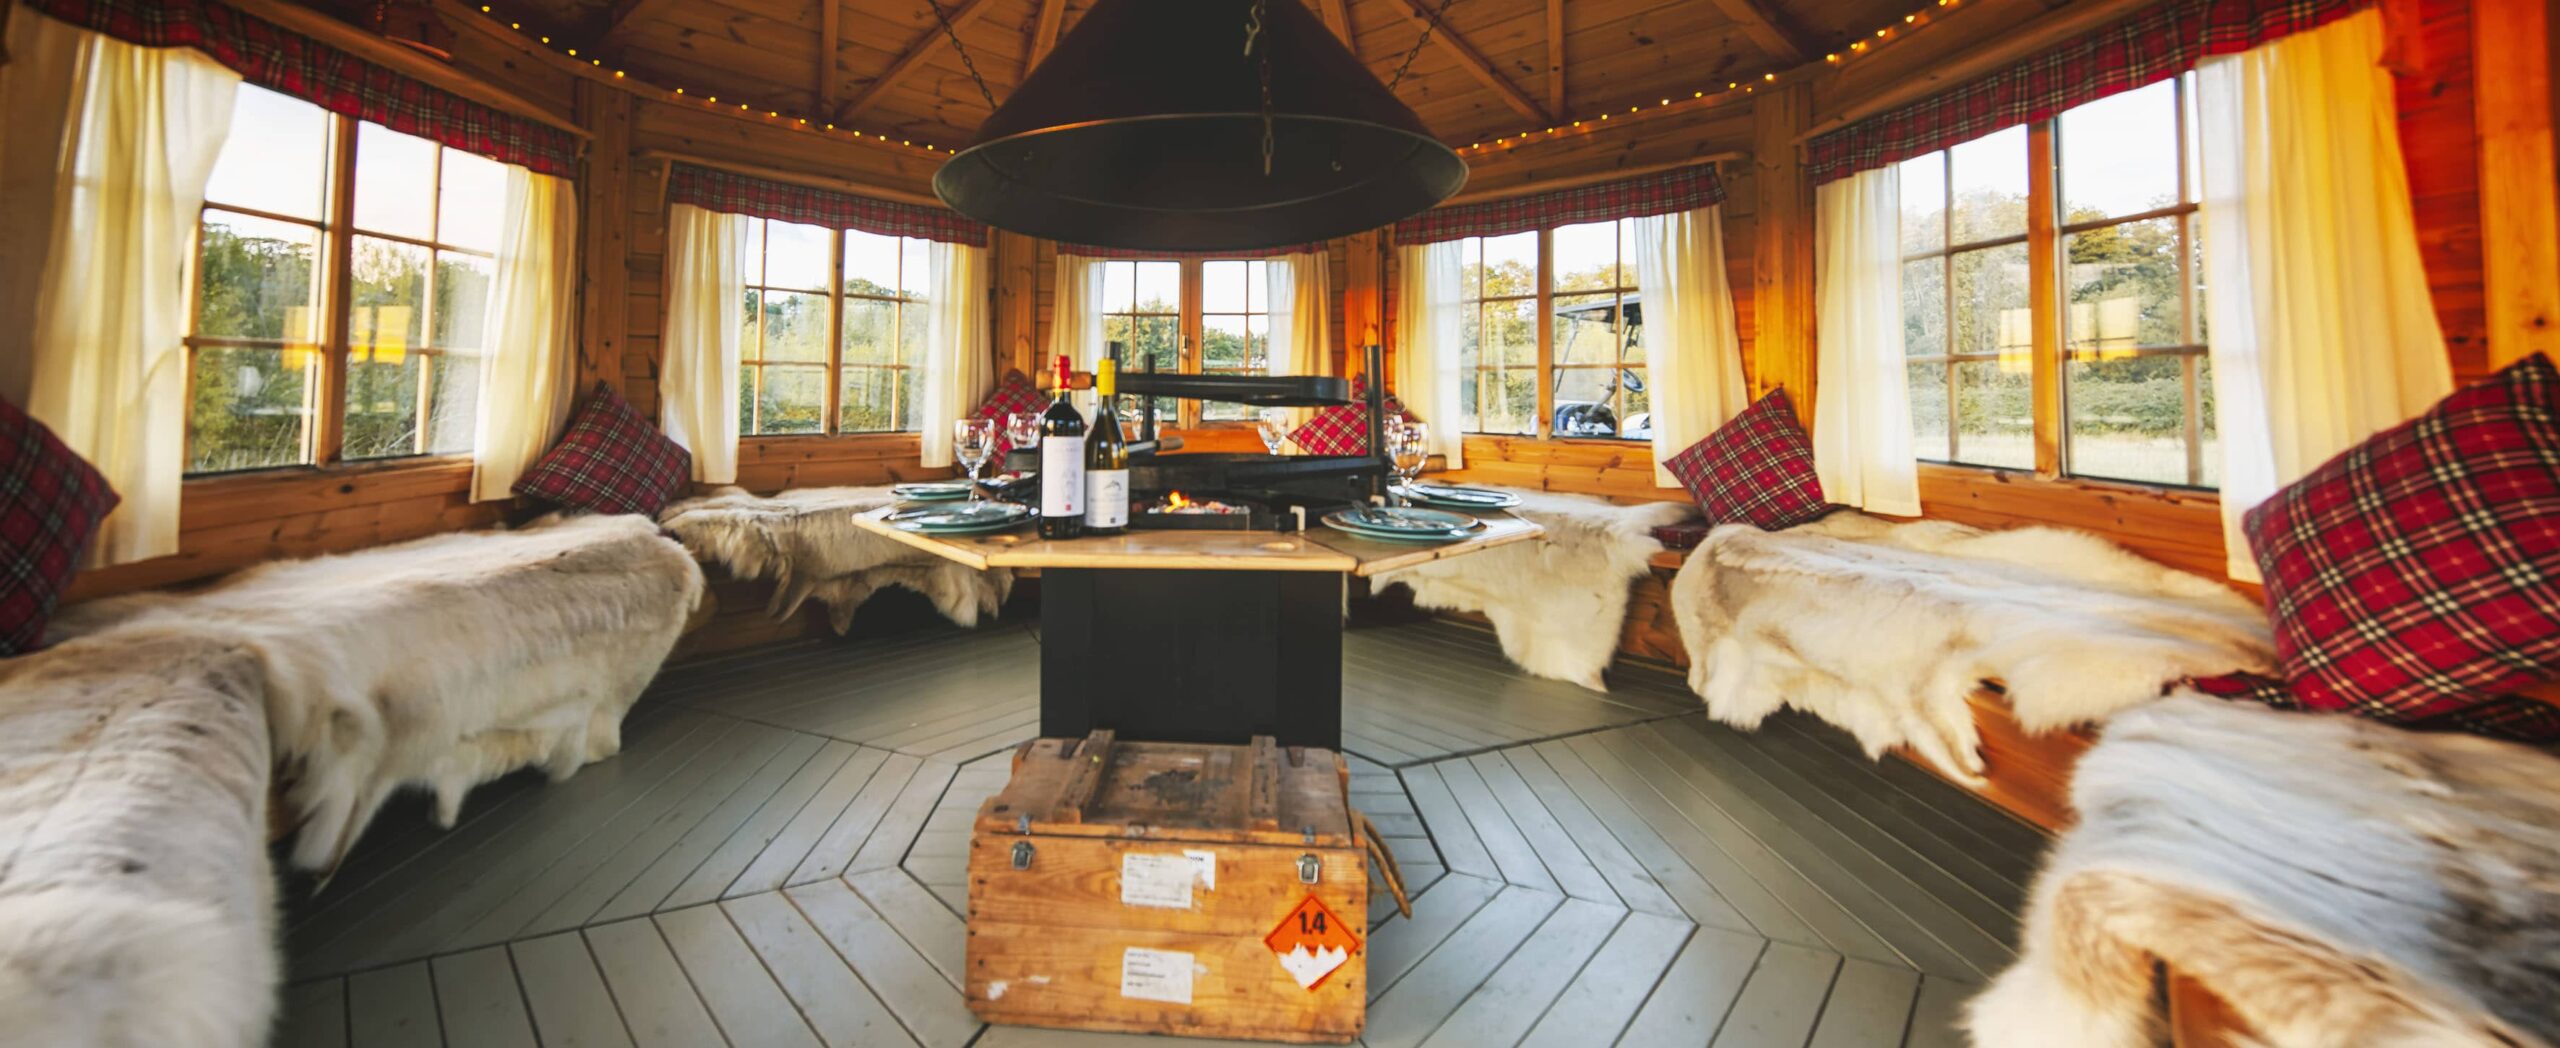 Inside of an octagonal BBQ hut with cosy decor and hides